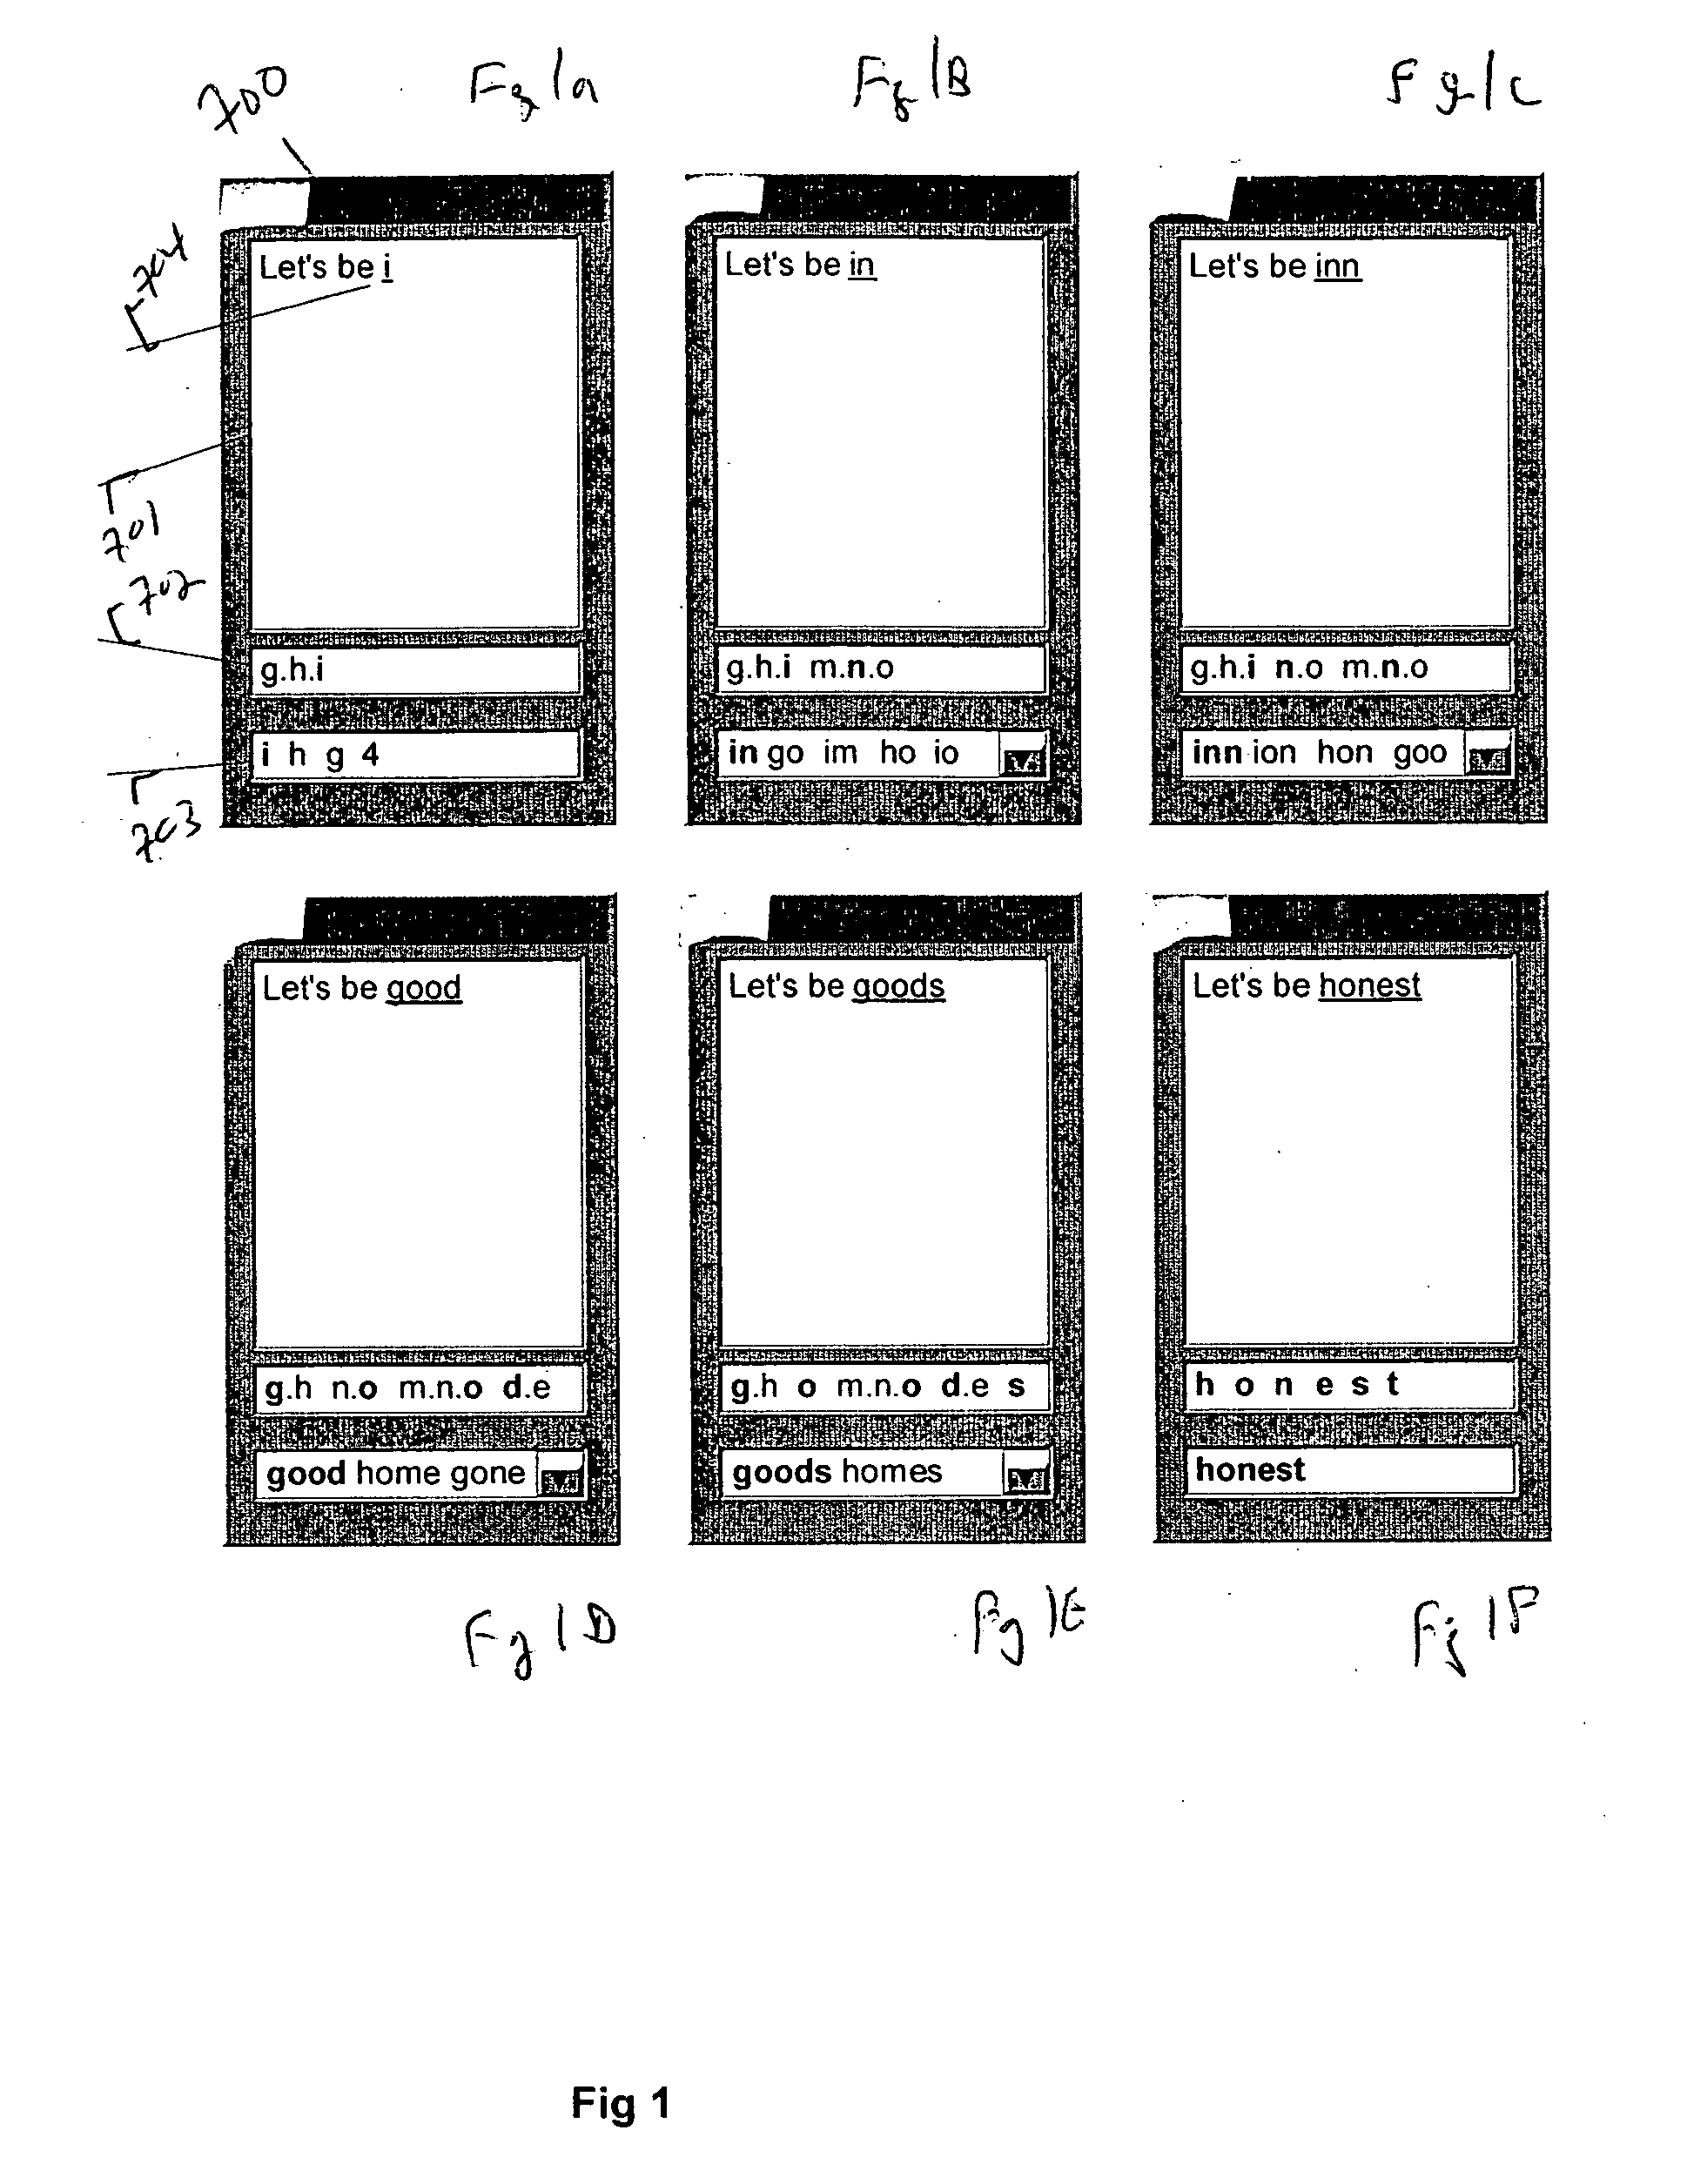 Apparatus and method for providing visual indication of character ambiguity during text entry